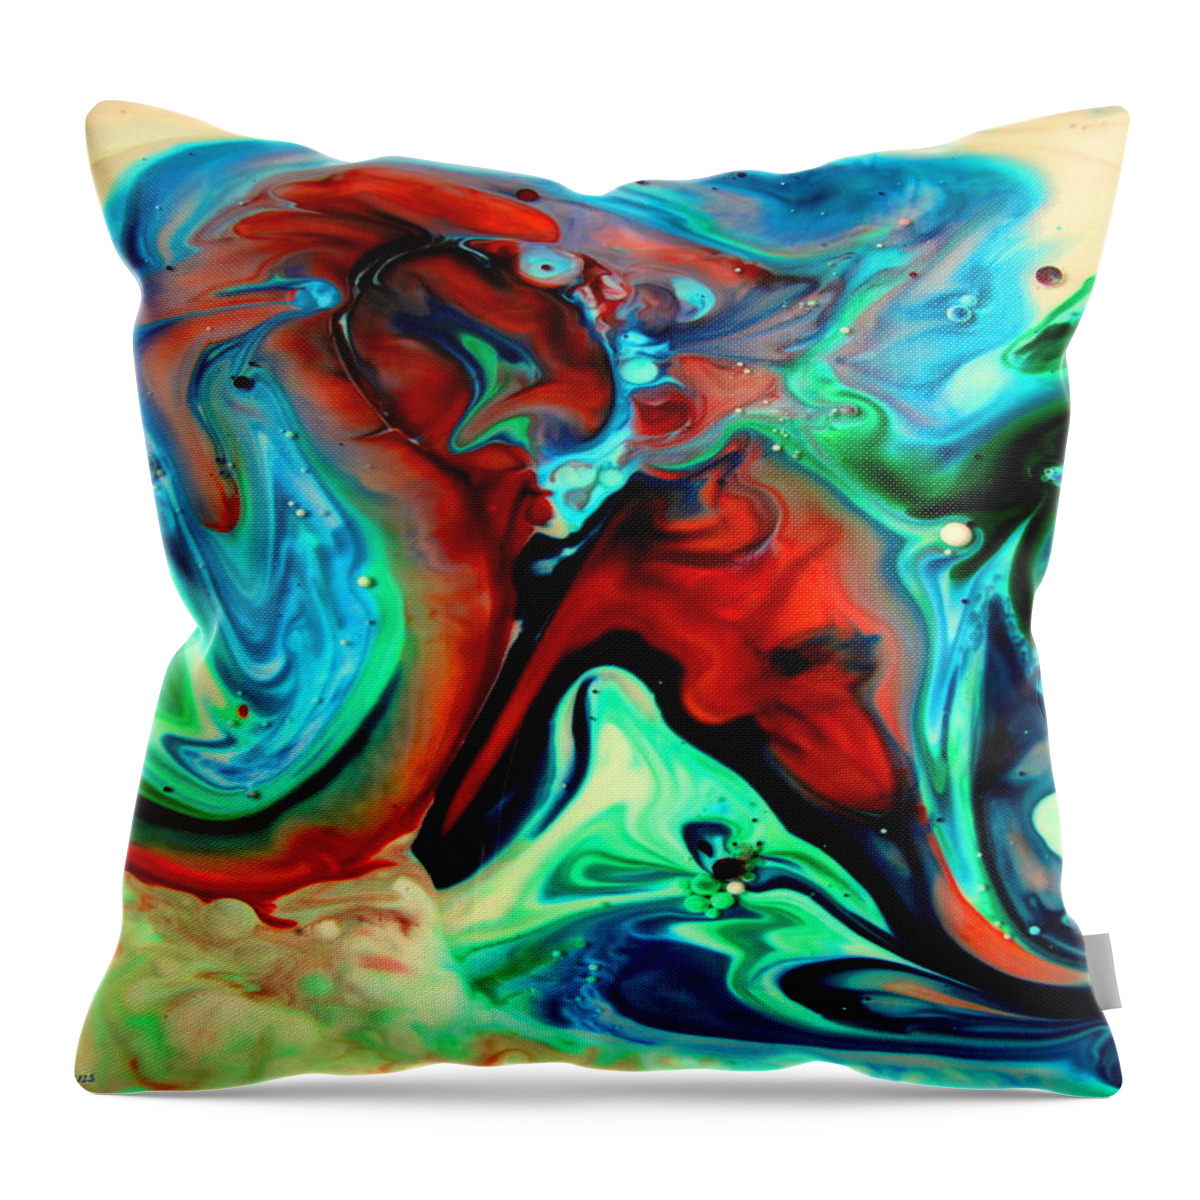 Liquid Art Throw Pillow featuring the painting Face To Face by Joyce Dickens